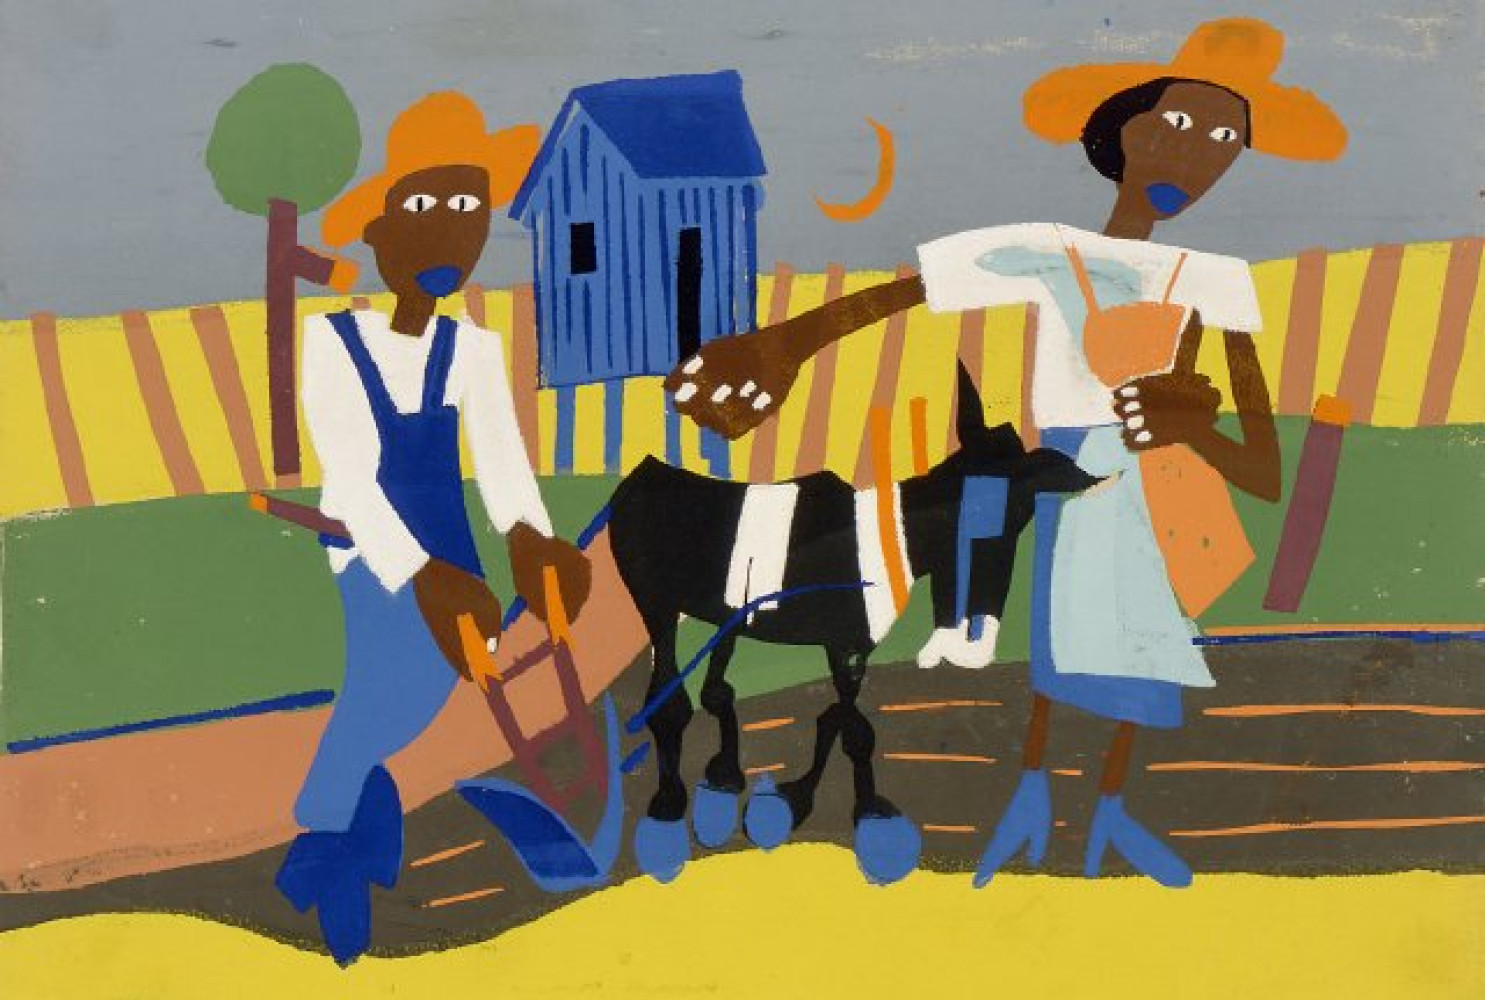 Sowing, ca. 1942, By William H. Johnson; Screenprint on paper; 11 1/2 x 16 inches; Museum Purchase with funds provided by the Anna Heyward Taylor Fund; 1959.020.0002.